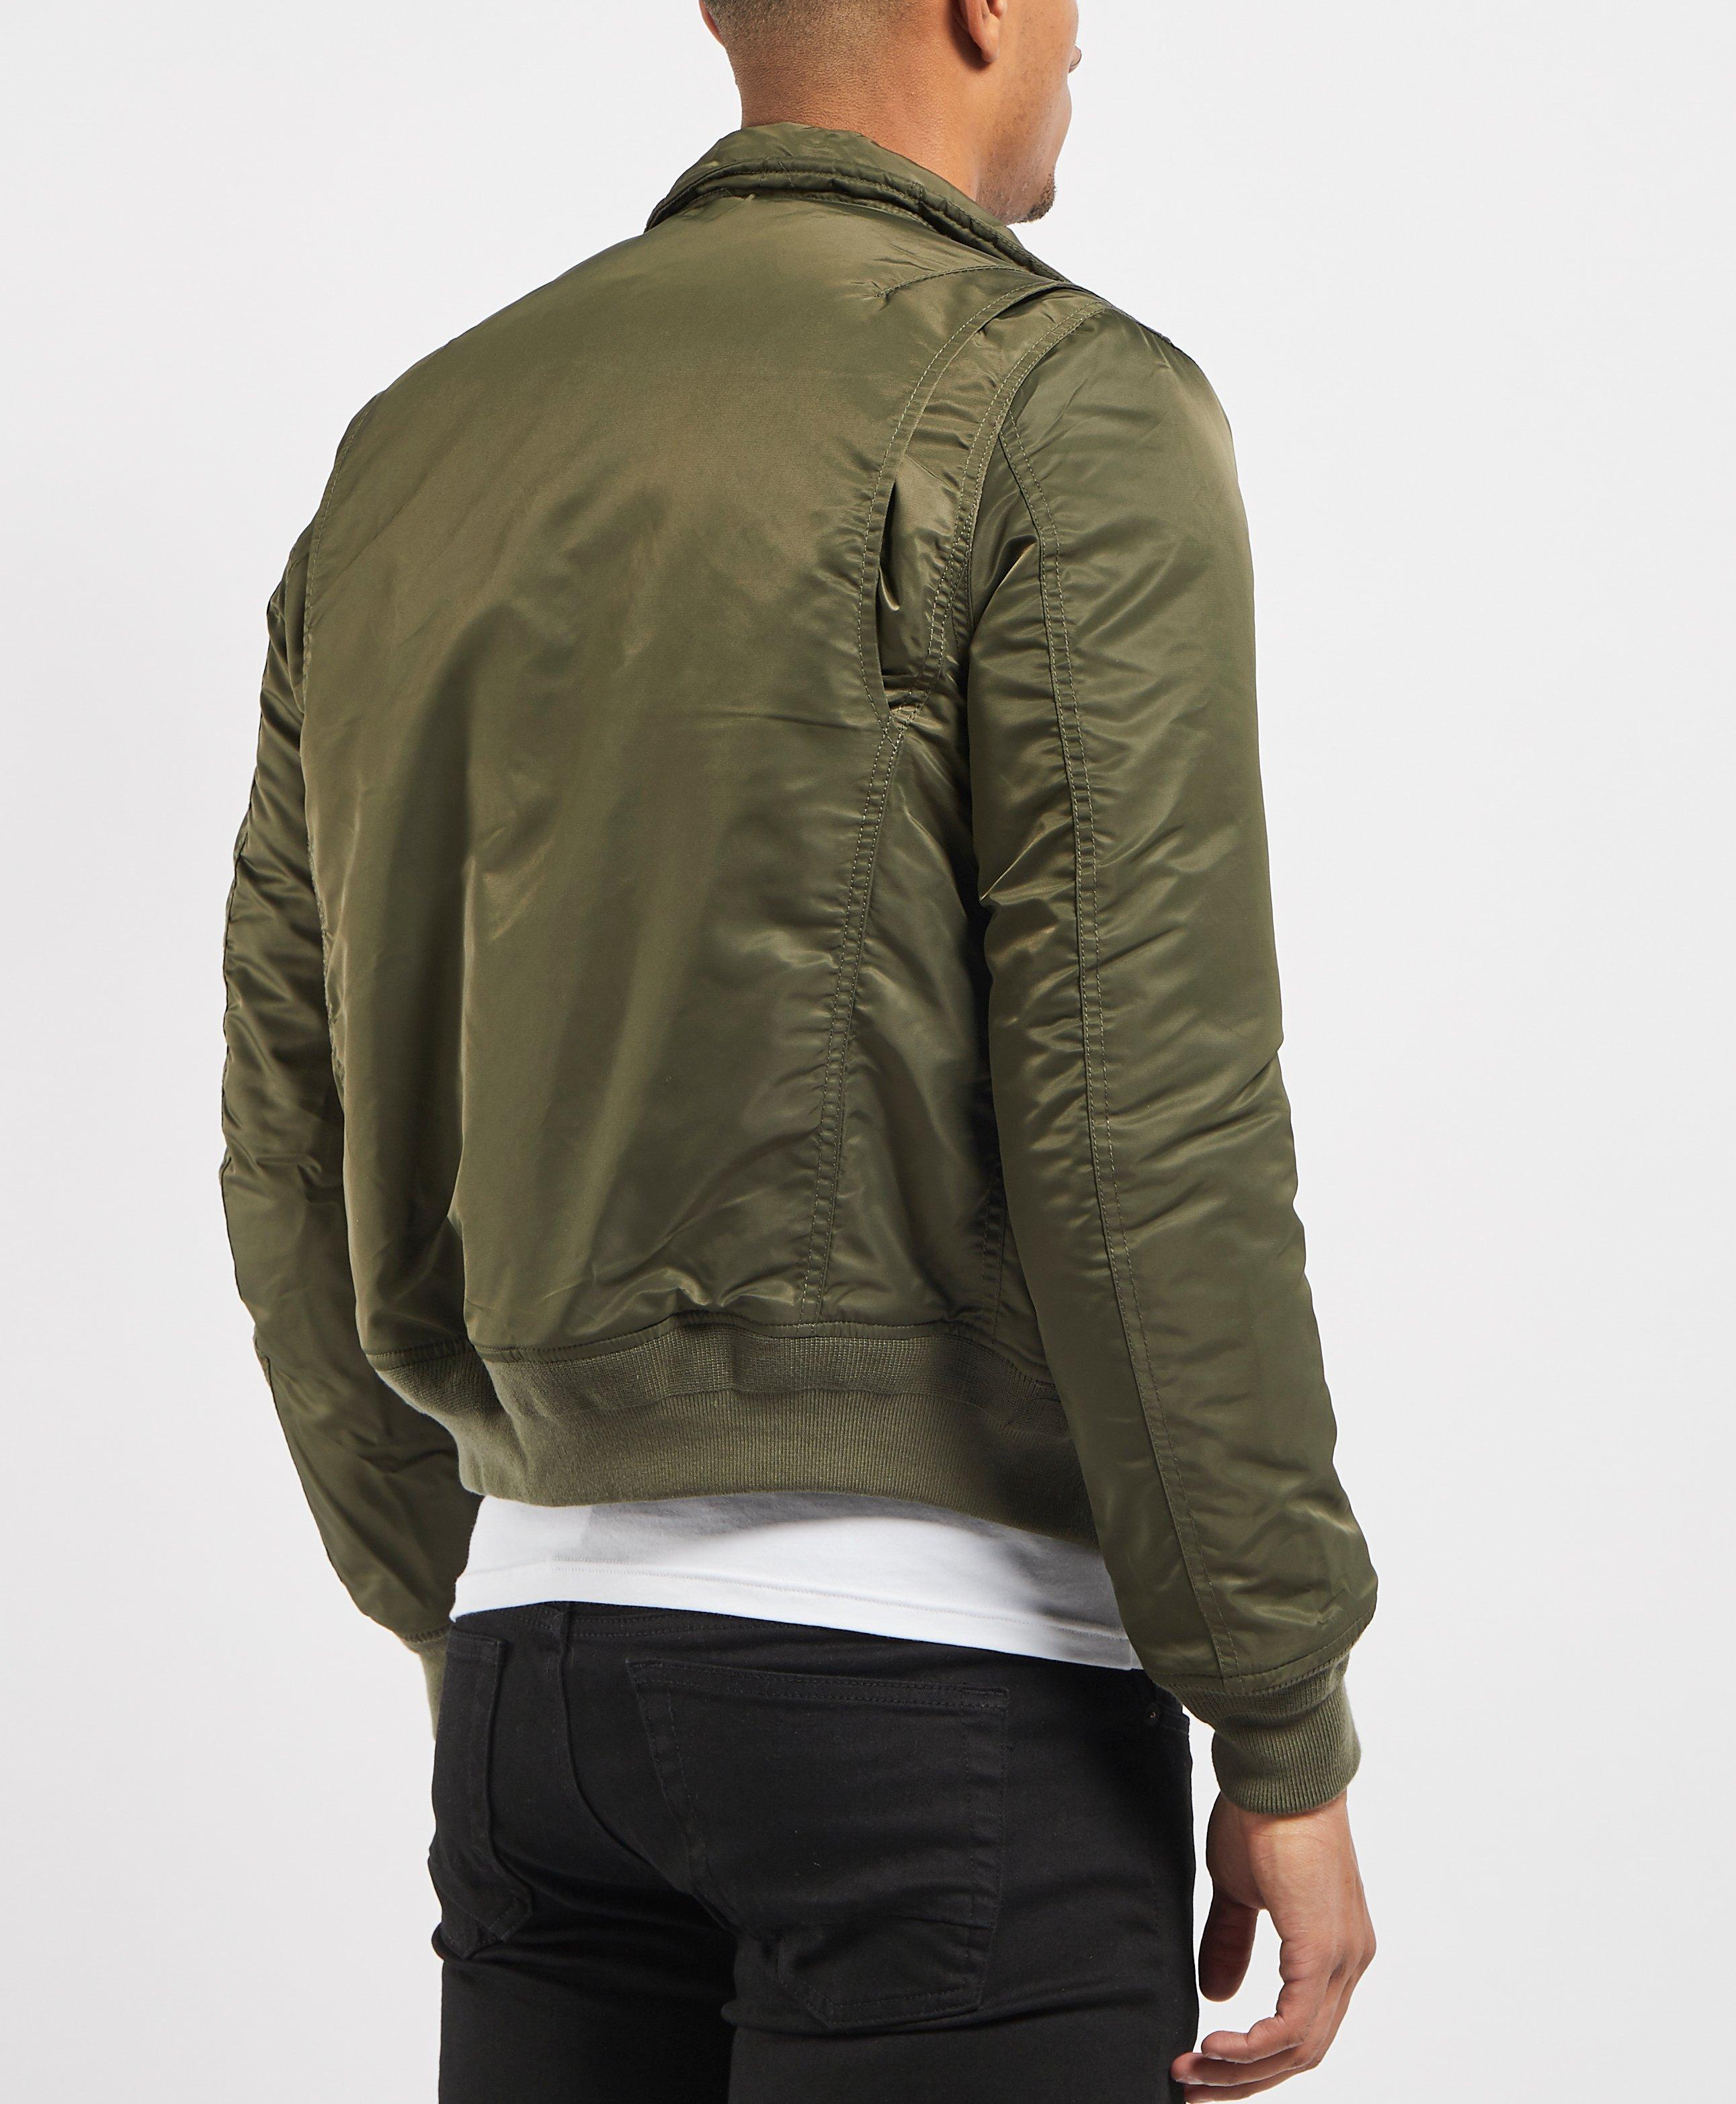 Schott Nyc Synthetic Cwu Bomber Jacket in Green for Men - Lyst